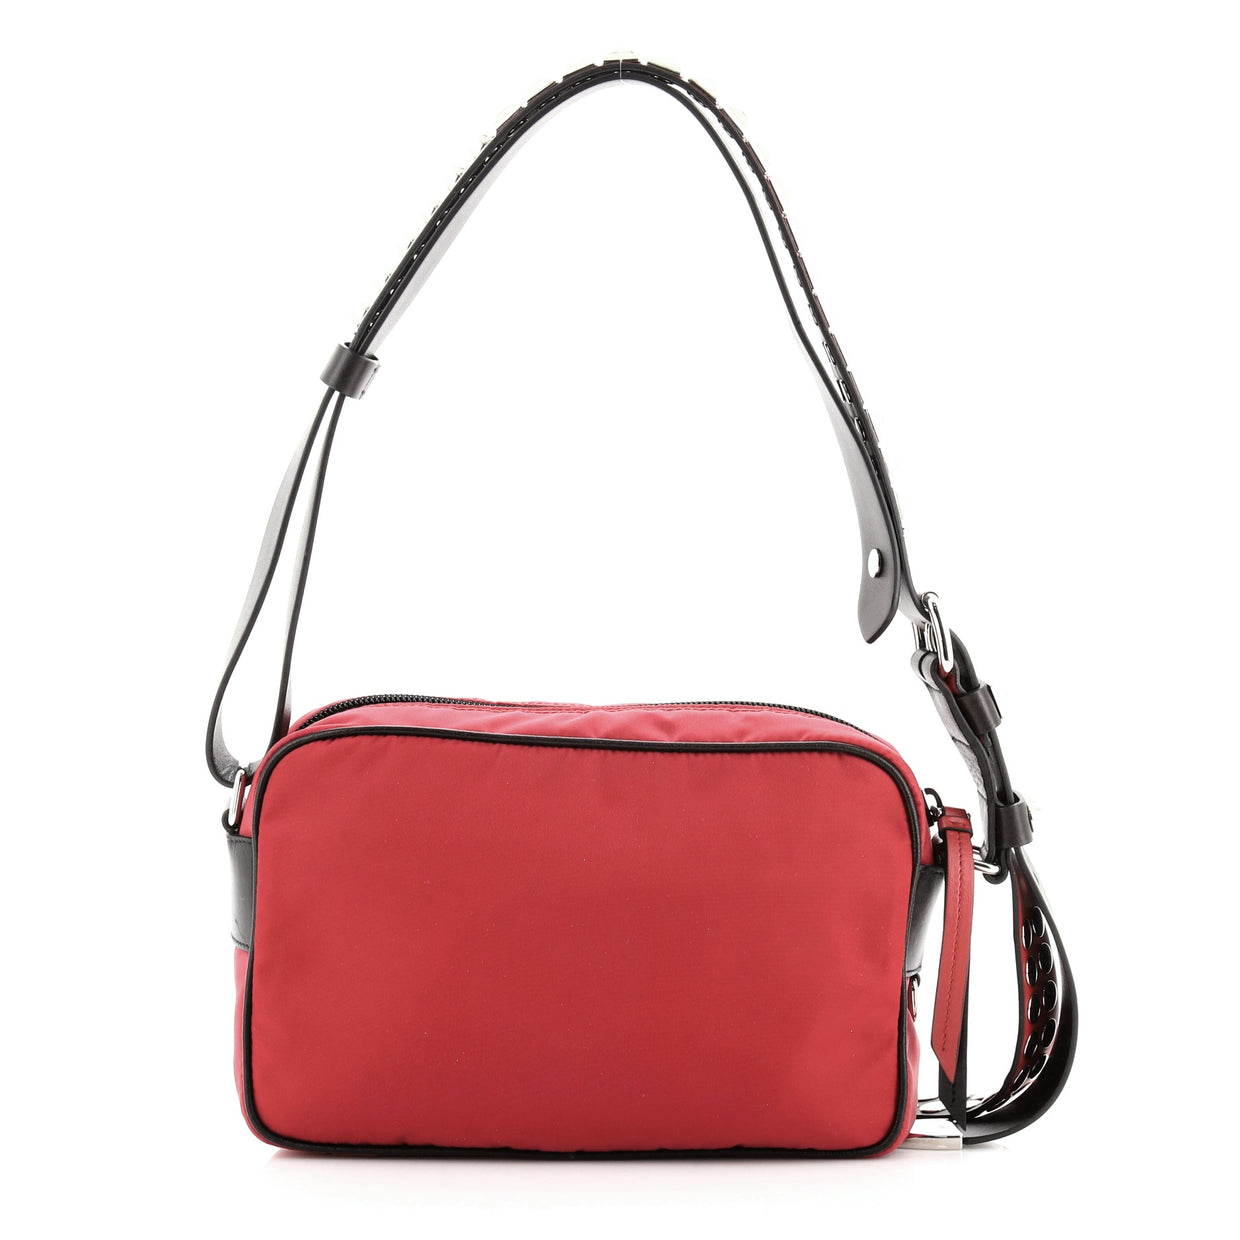 Prada New Vela Shoulder Bag Tessuto with Studded Leather Small Red 71525168